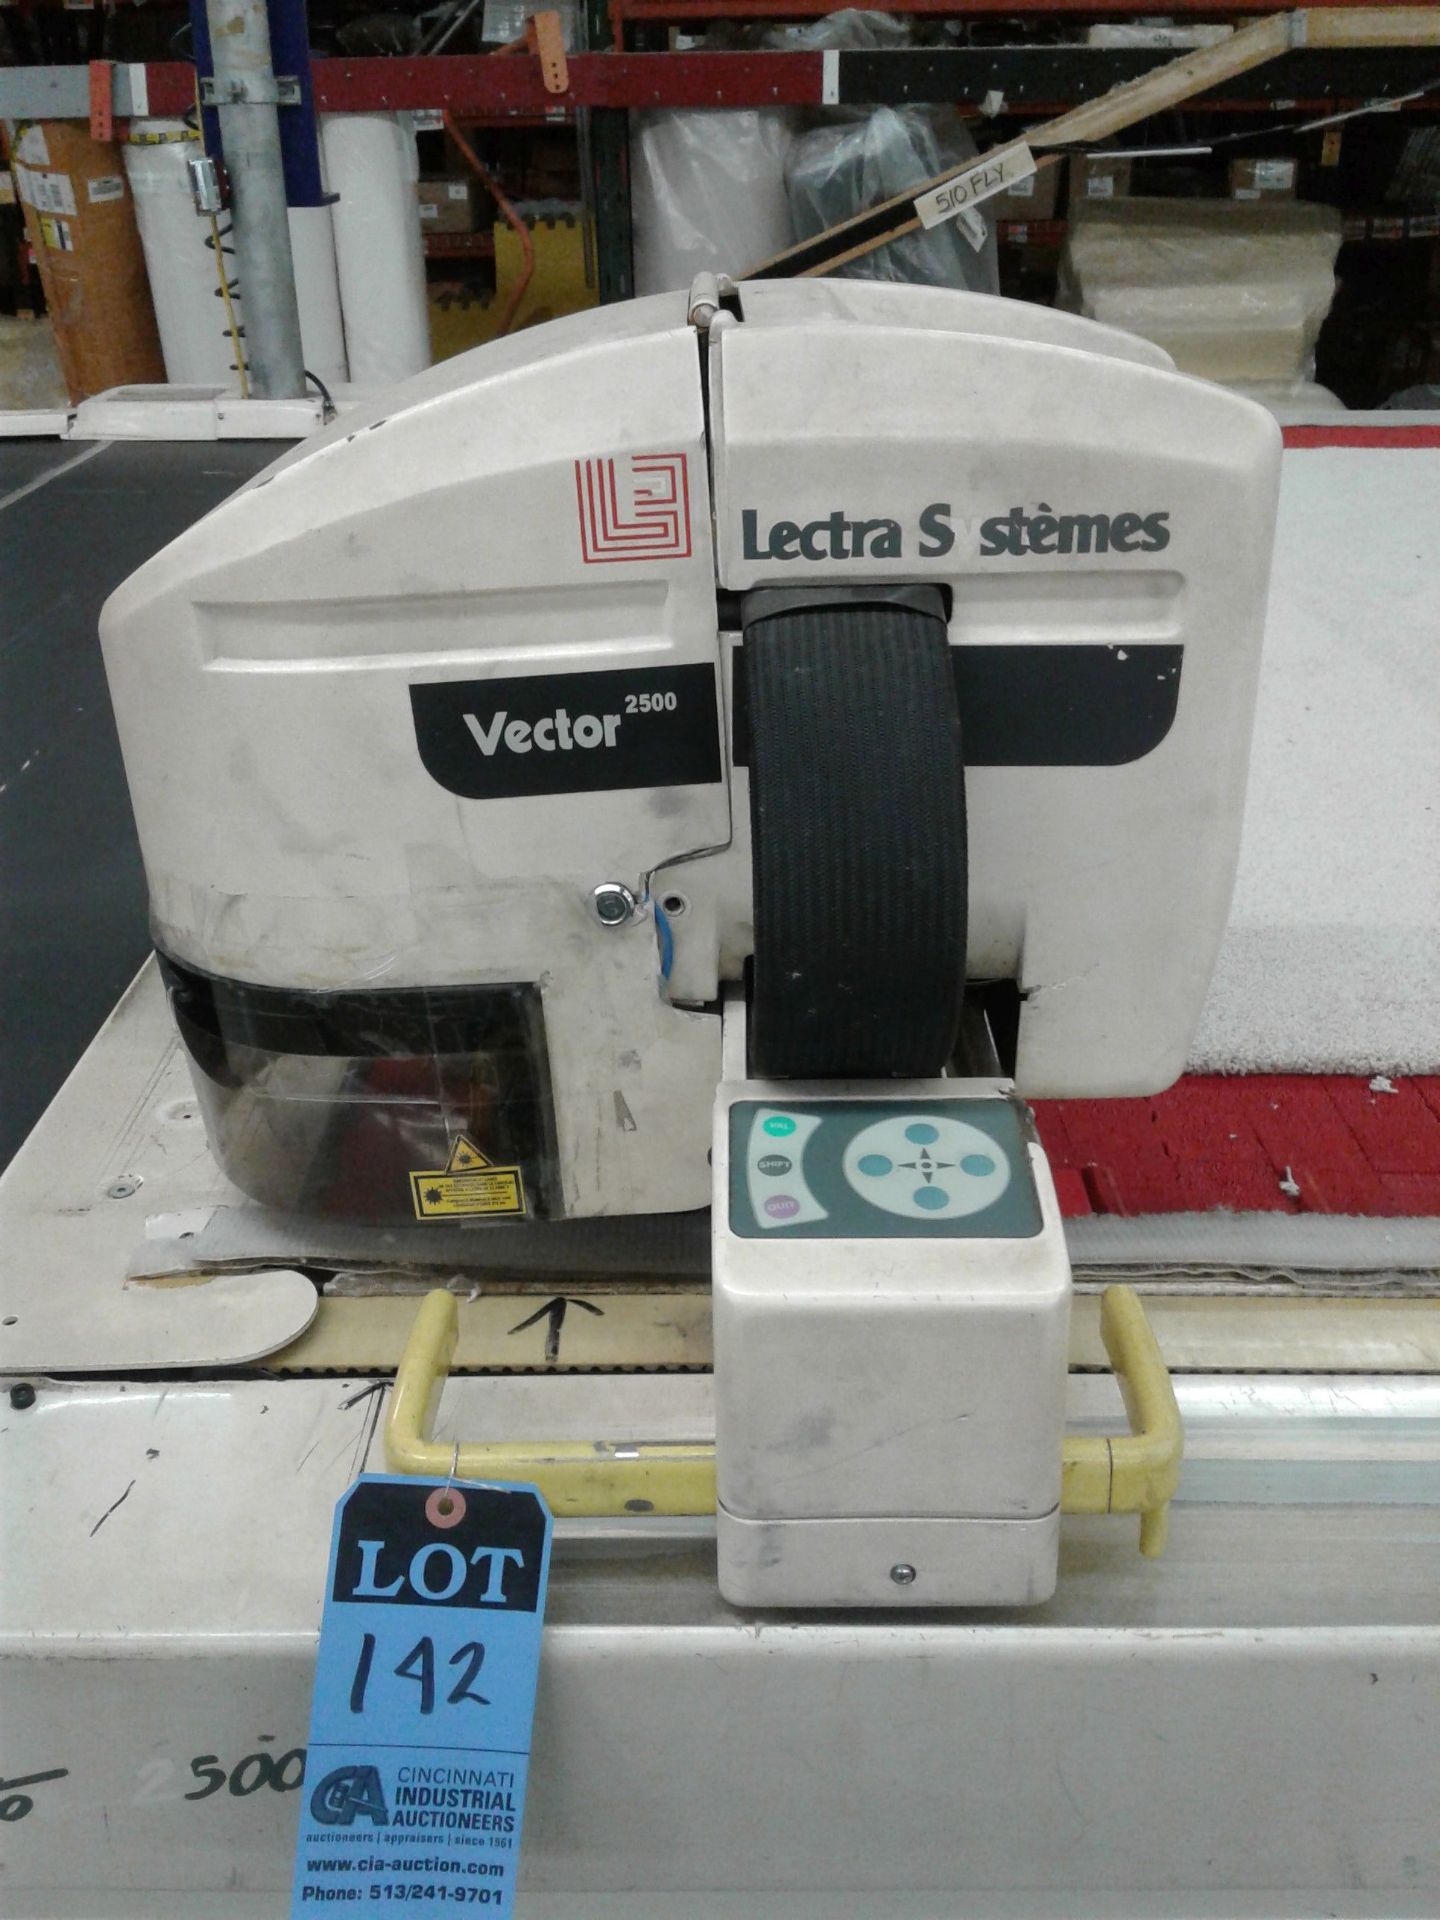 LECTRA SYSTEMS MODEL VT2500 V2 COMPUTER CONTROLLED FABRIC CUTTER; S/N 000031, VECTOR 2500 CUTTING - Image 2 of 9